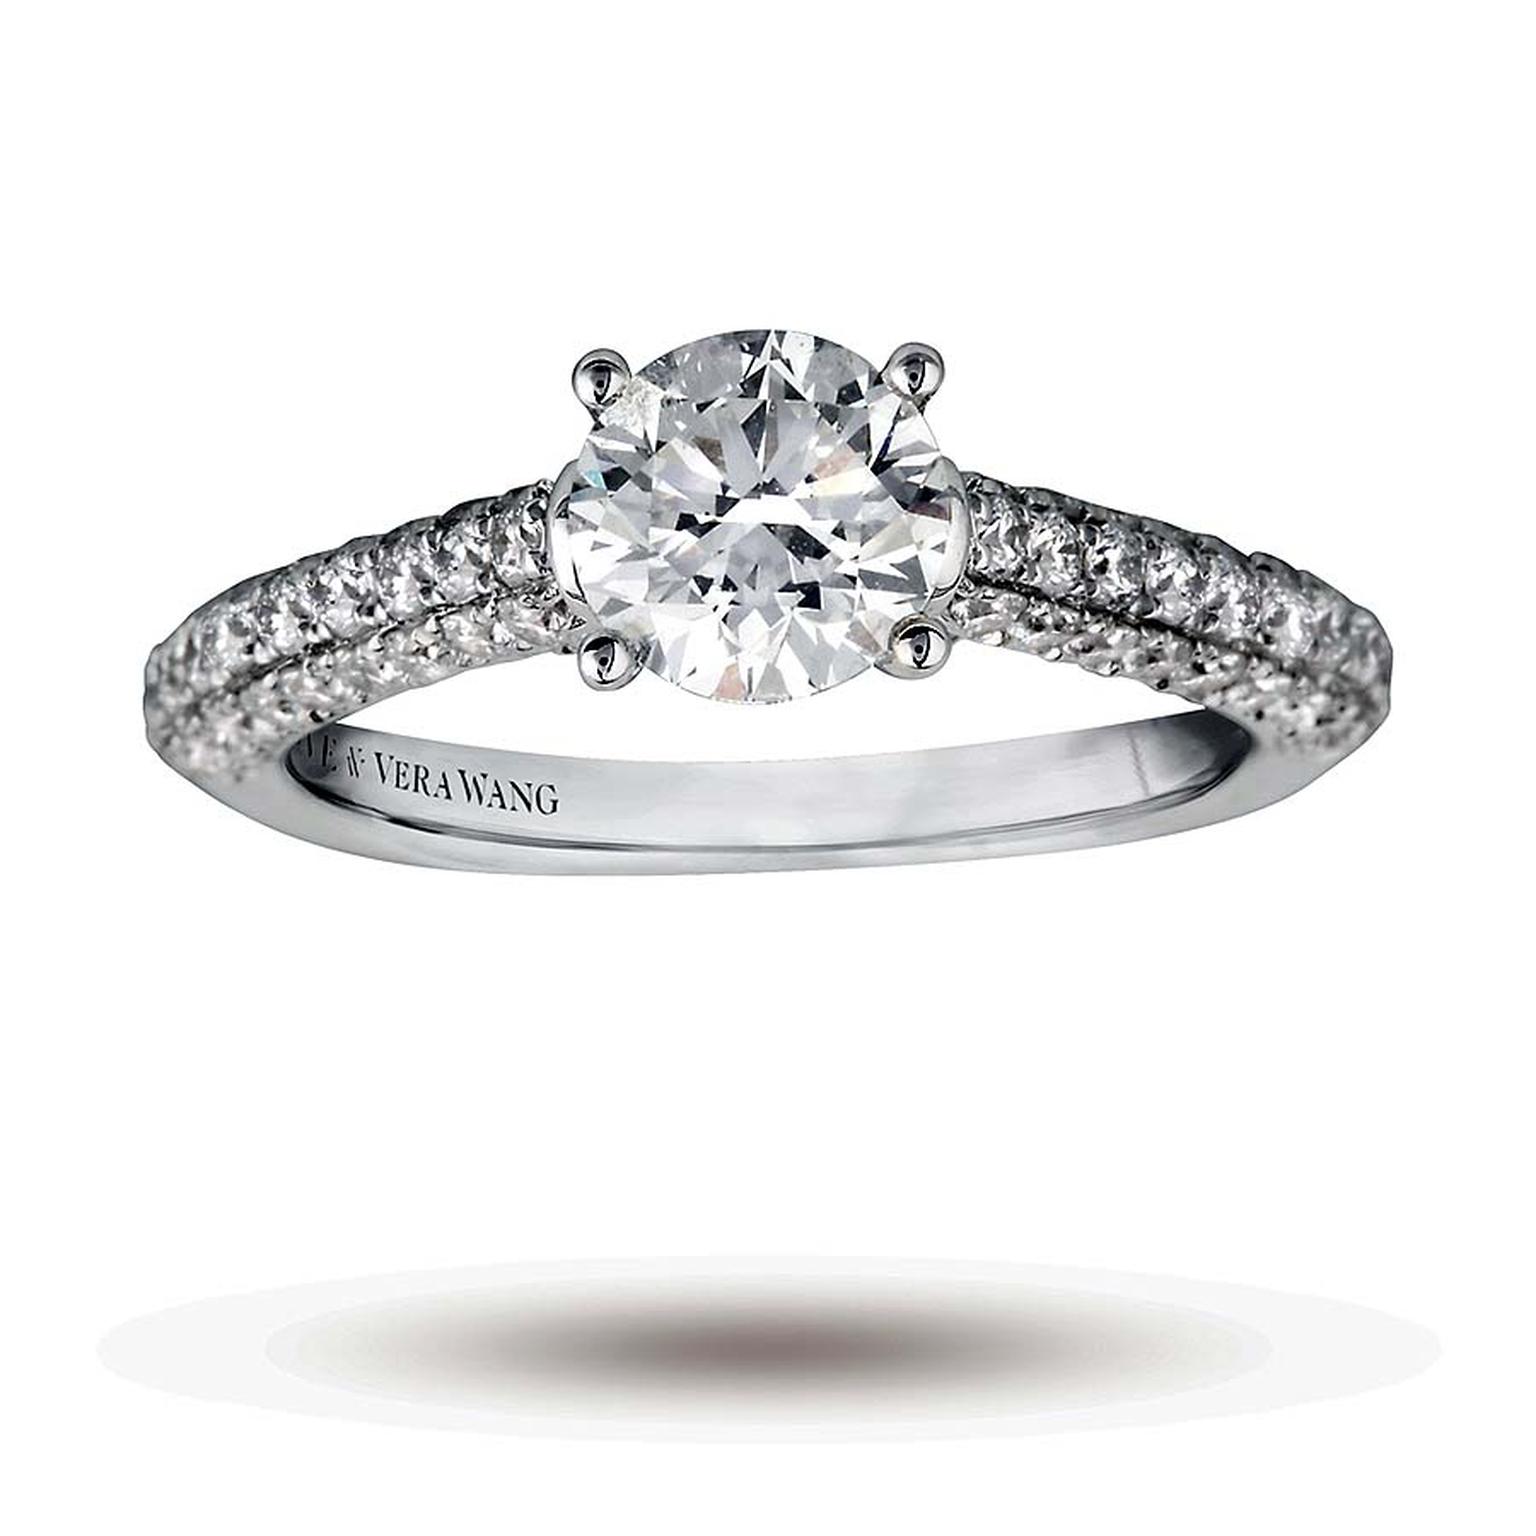 Vera Wang LOVE bridal jewellery collection now available in the UK